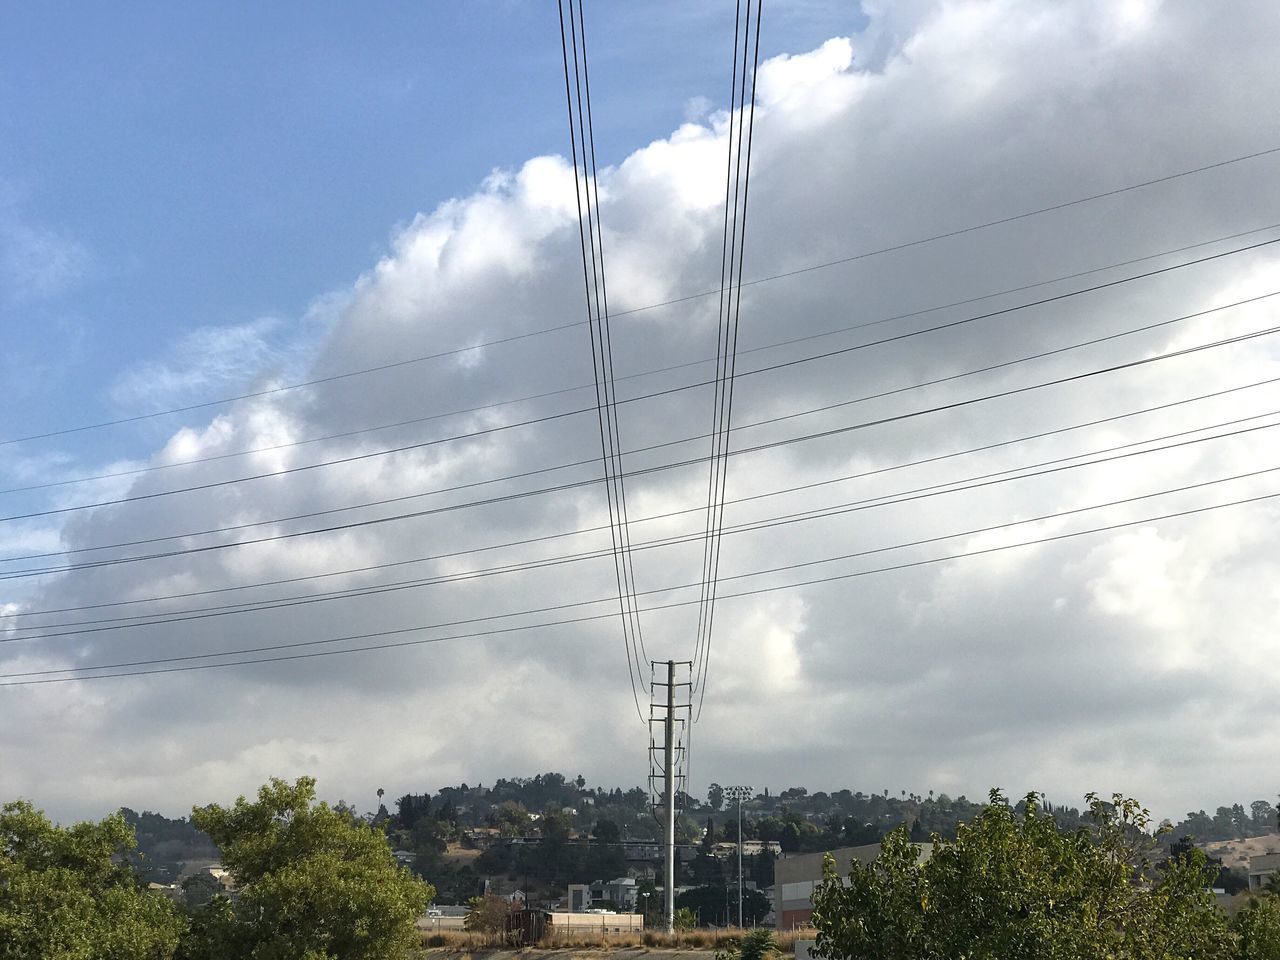 cable, sky, cloud - sky, tree, power line, power supply, electricity, fuel and power generation, connection, electricity pylon, day, low angle view, no people, nature, technology, outdoors, telephone line, beauty in nature